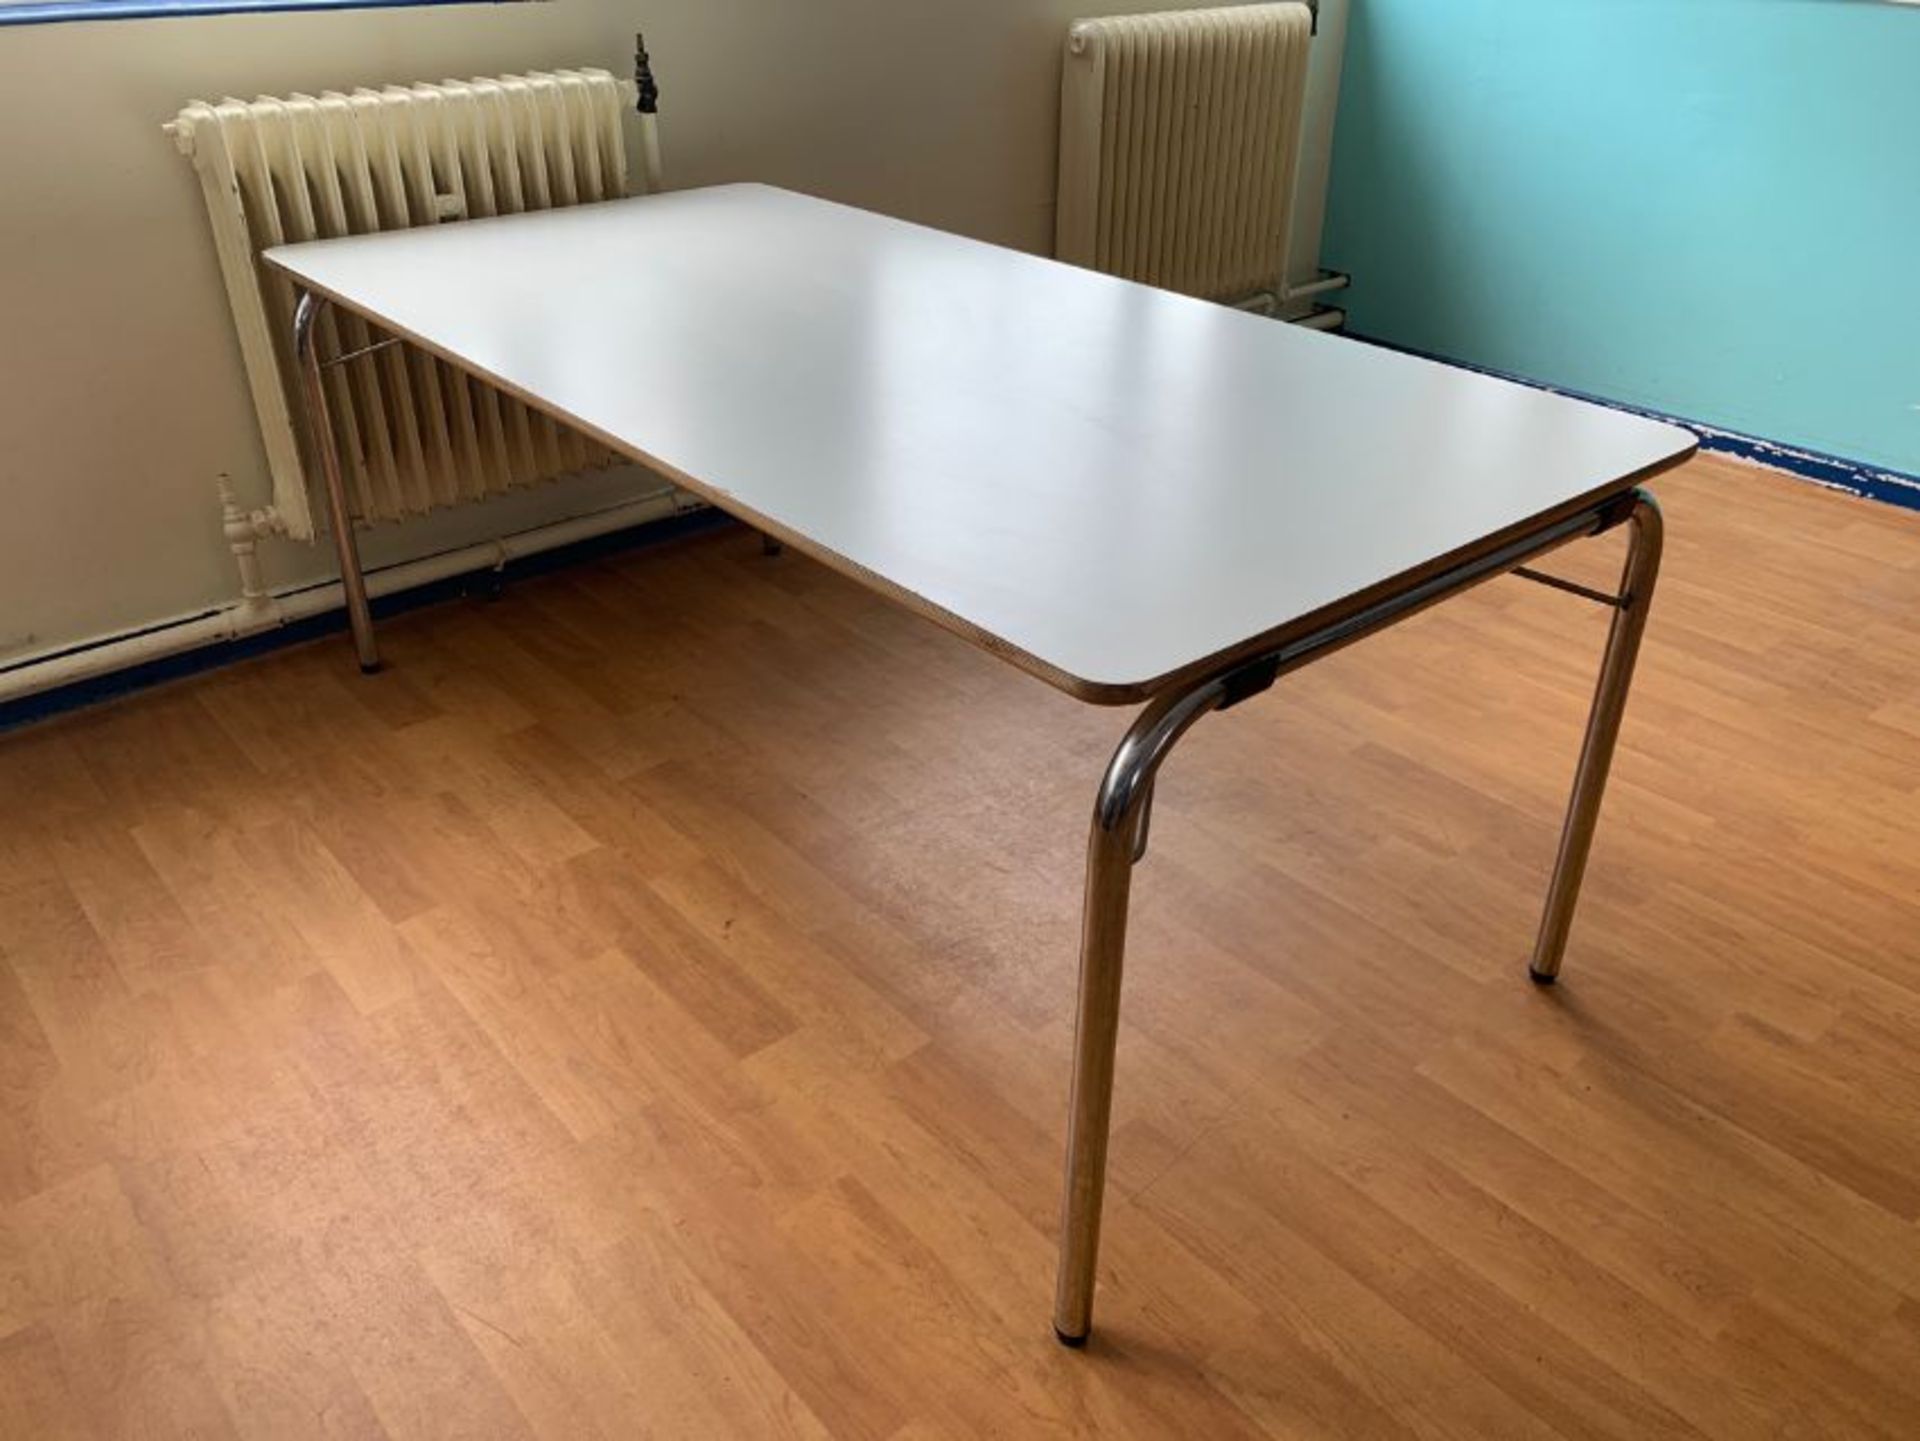 Rectangular Table with Foldable Legs - Image 3 of 7